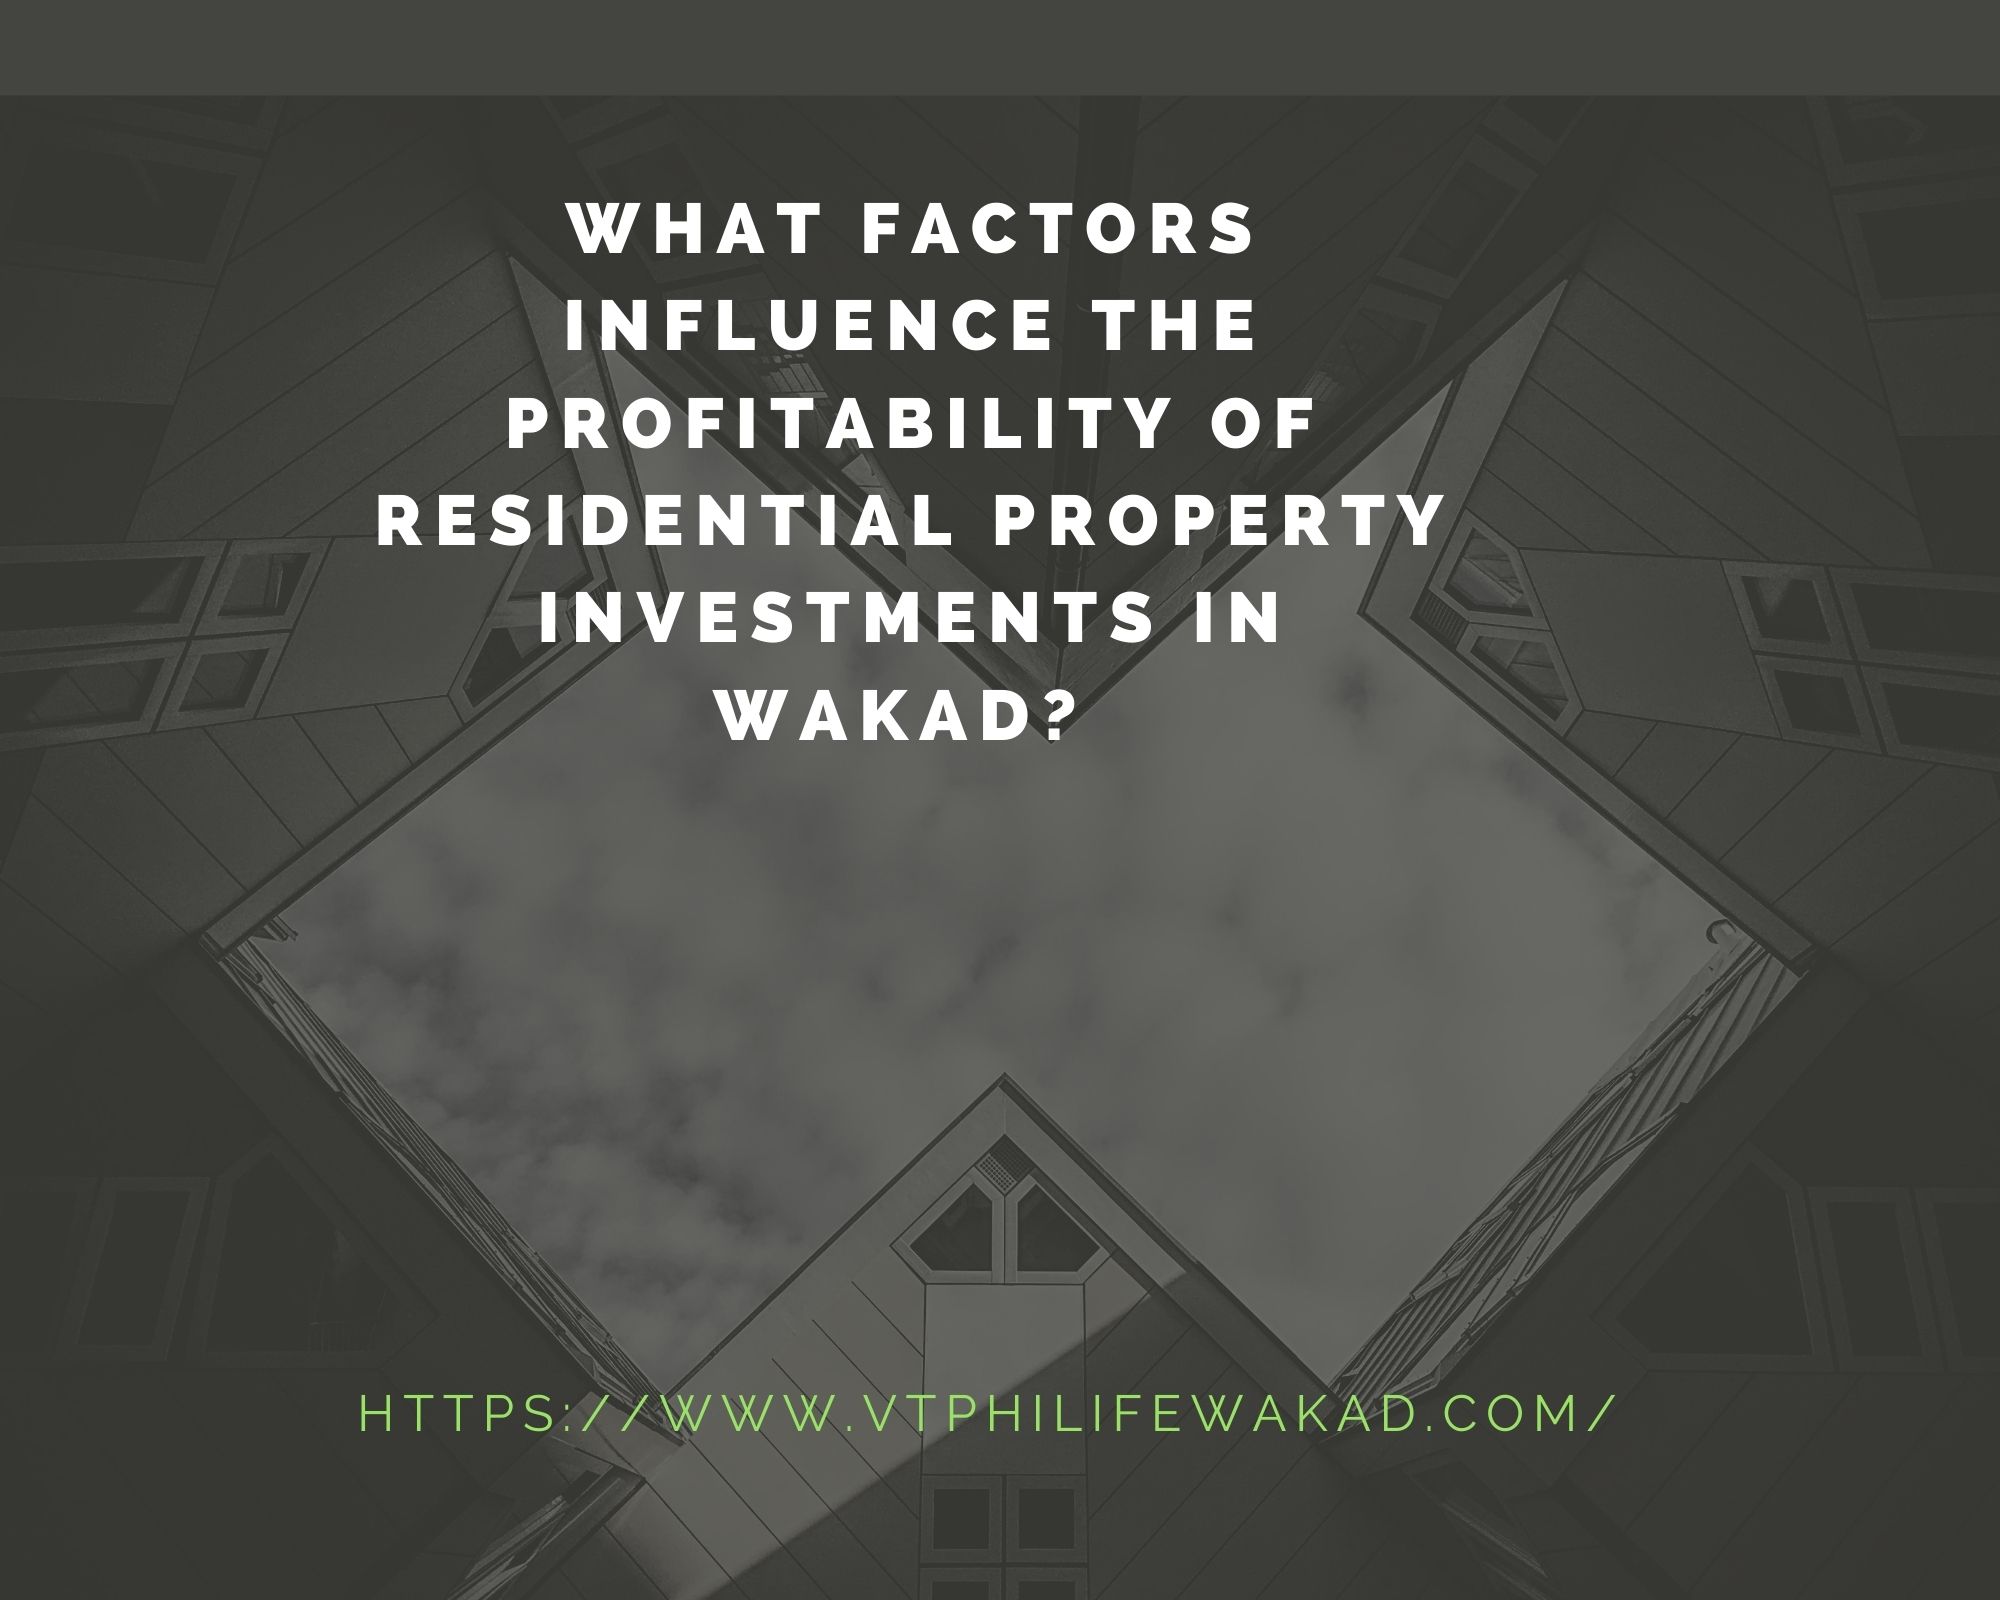 What factors influence the profitability of residential property investments in Wakad?